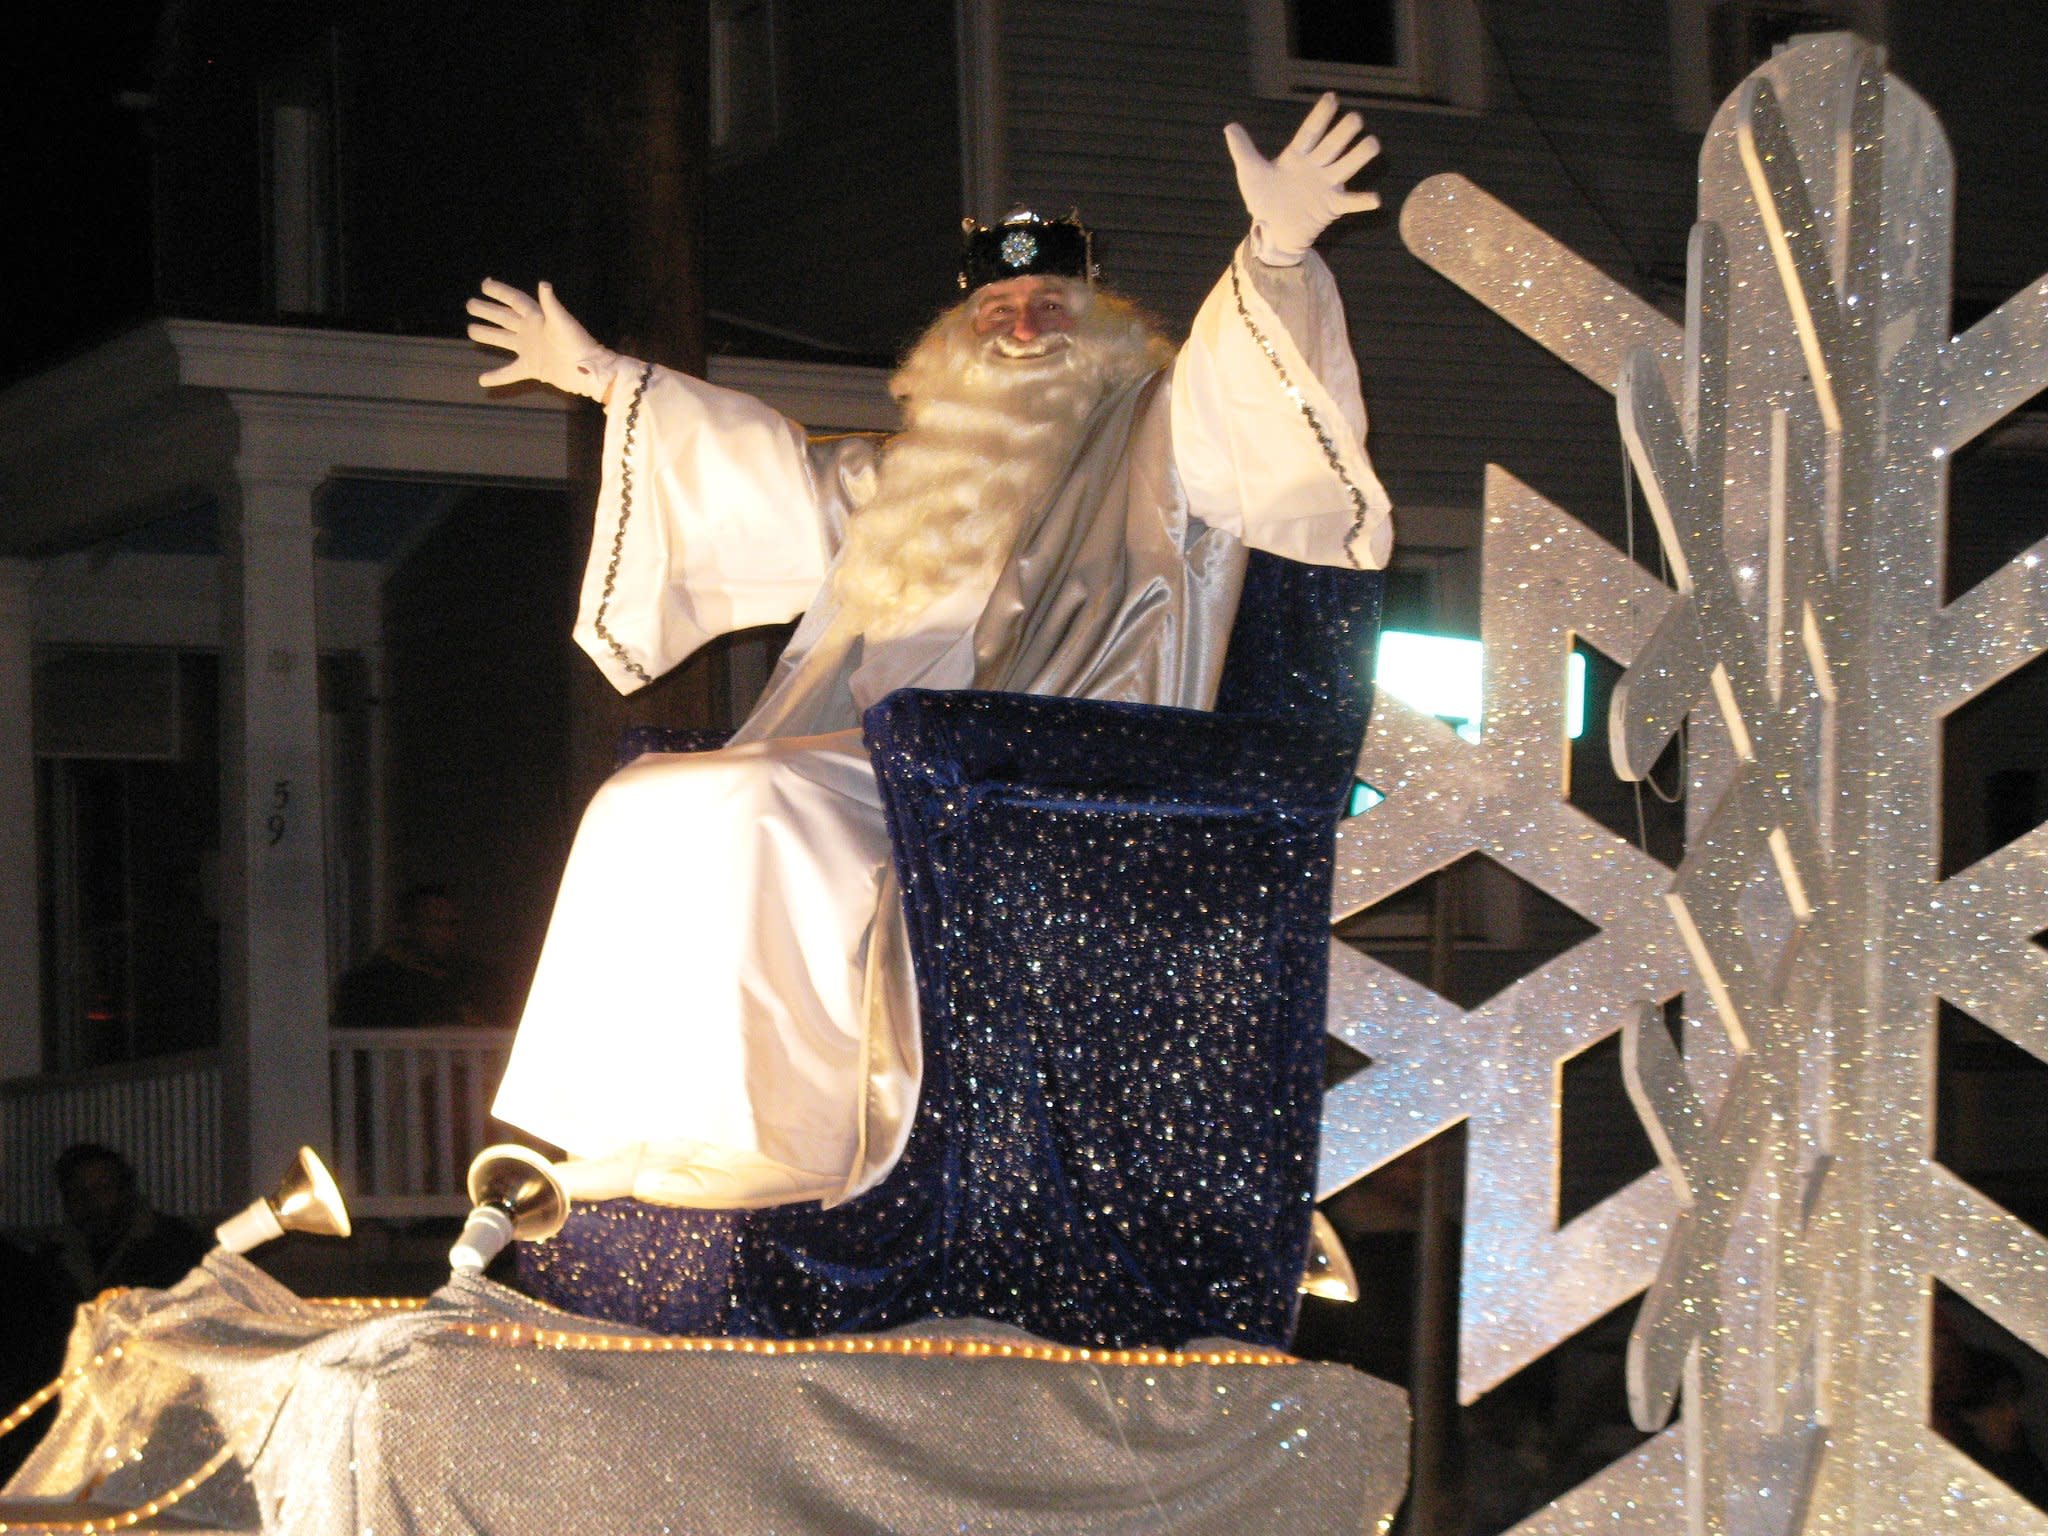 King Frost, aka Santa in all white sits on a thrown of blue with sparkling stars.  He is the last float in the King Frost Parade each year in Hamburg, PA